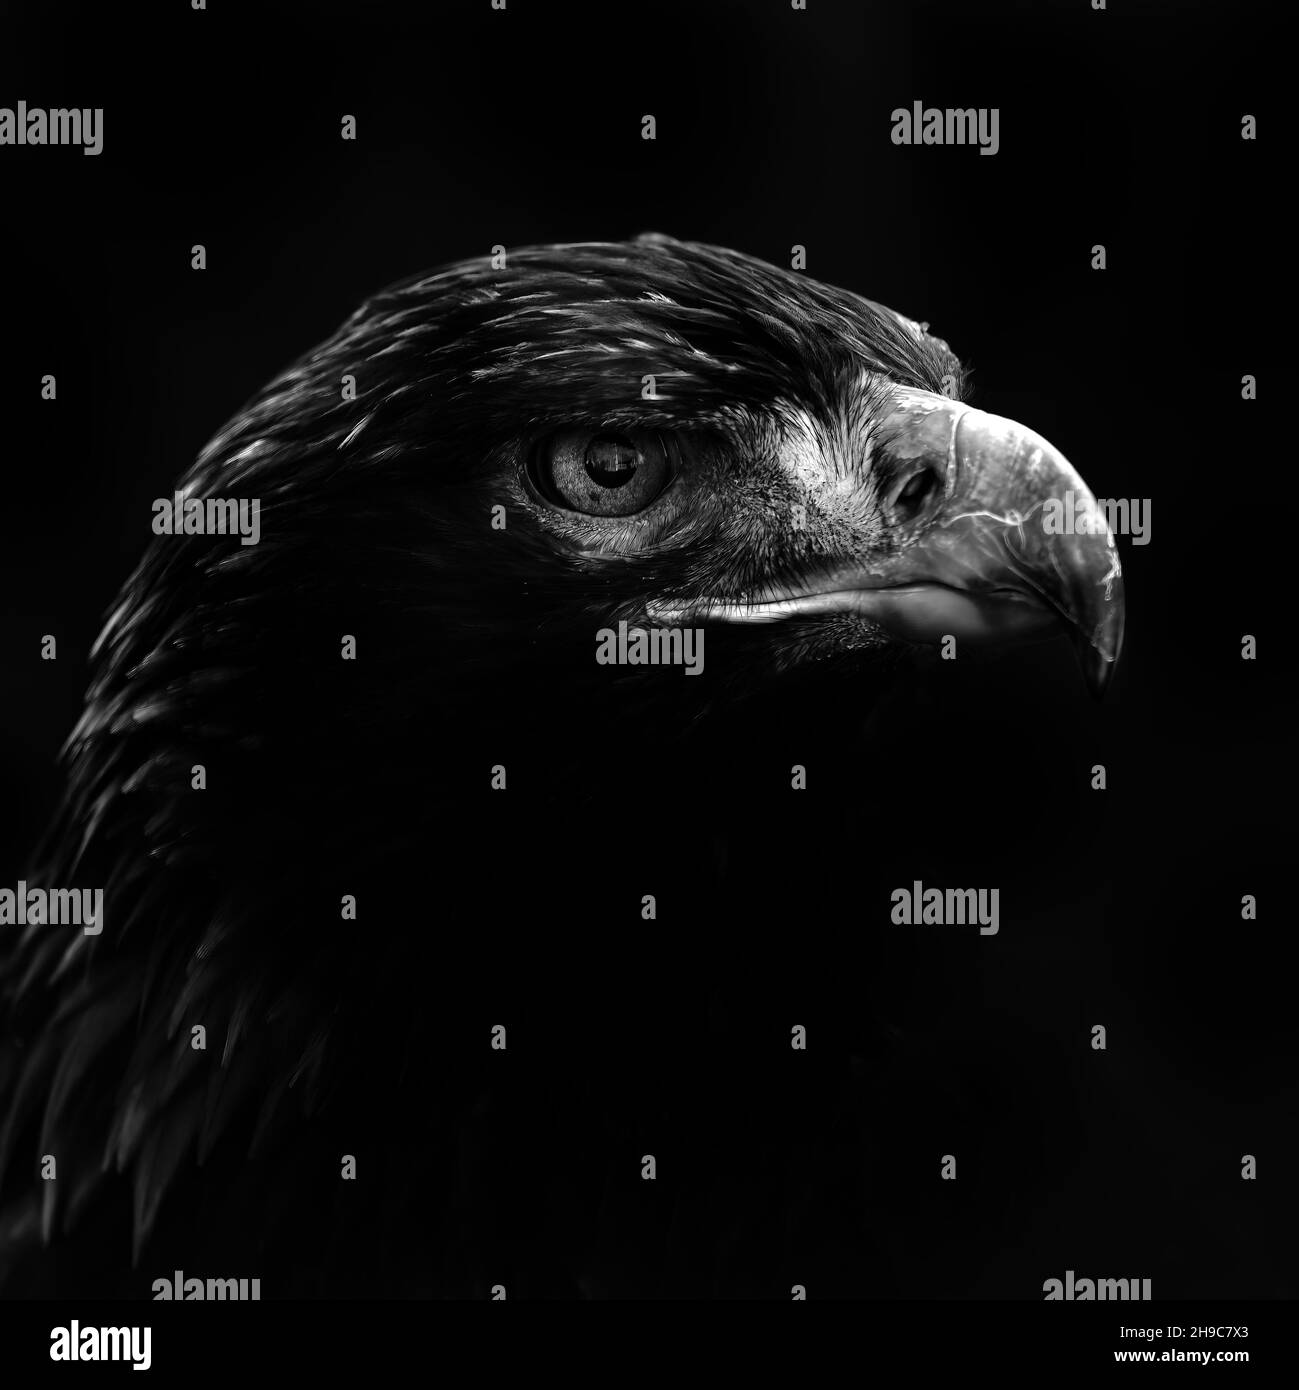 black and white close up of golden eagle head Stock Photo